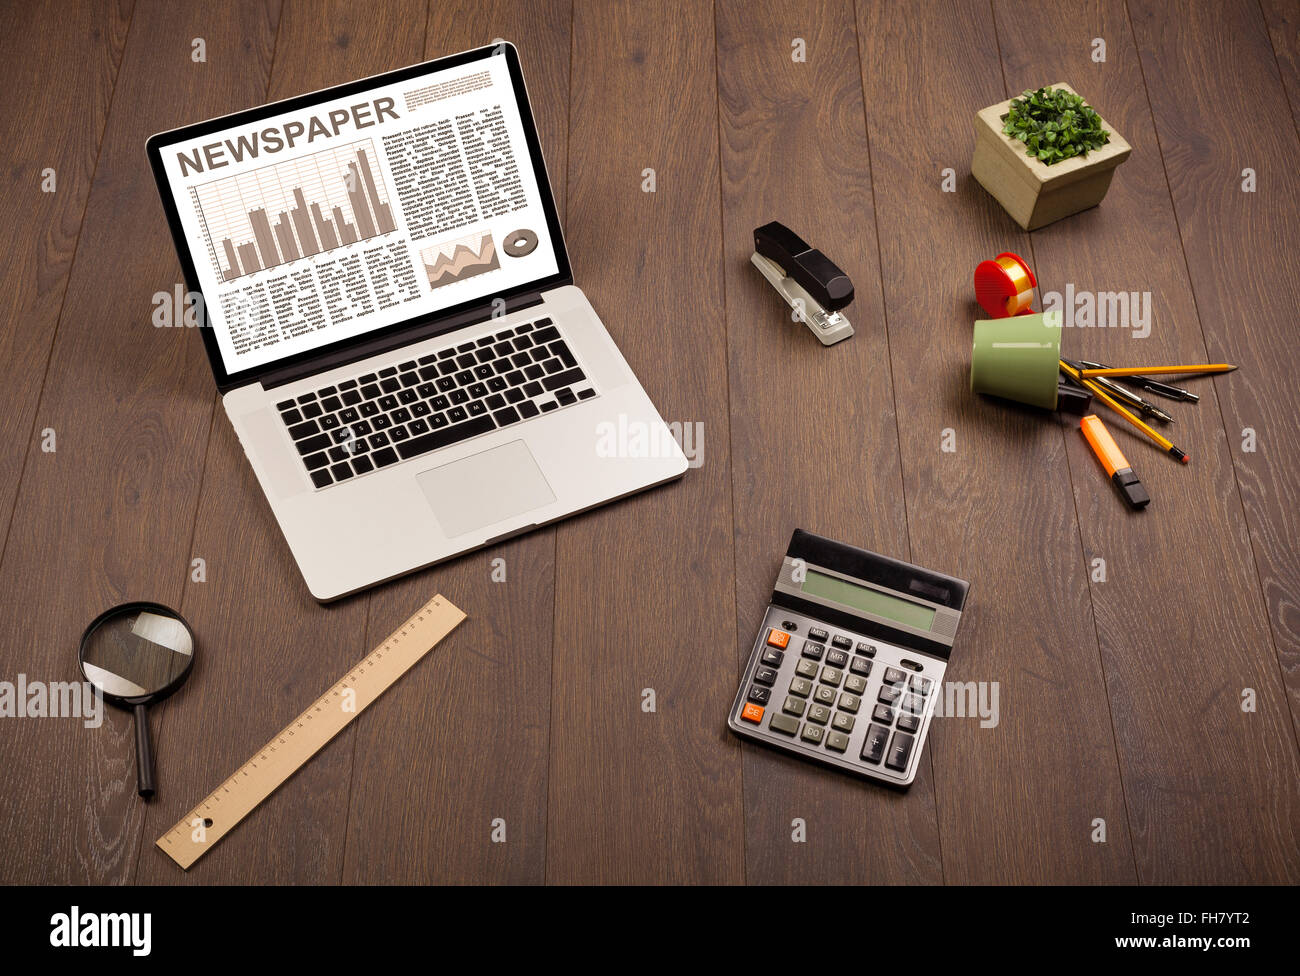 Business laptop with stock market report on wooden desk Stock Photo